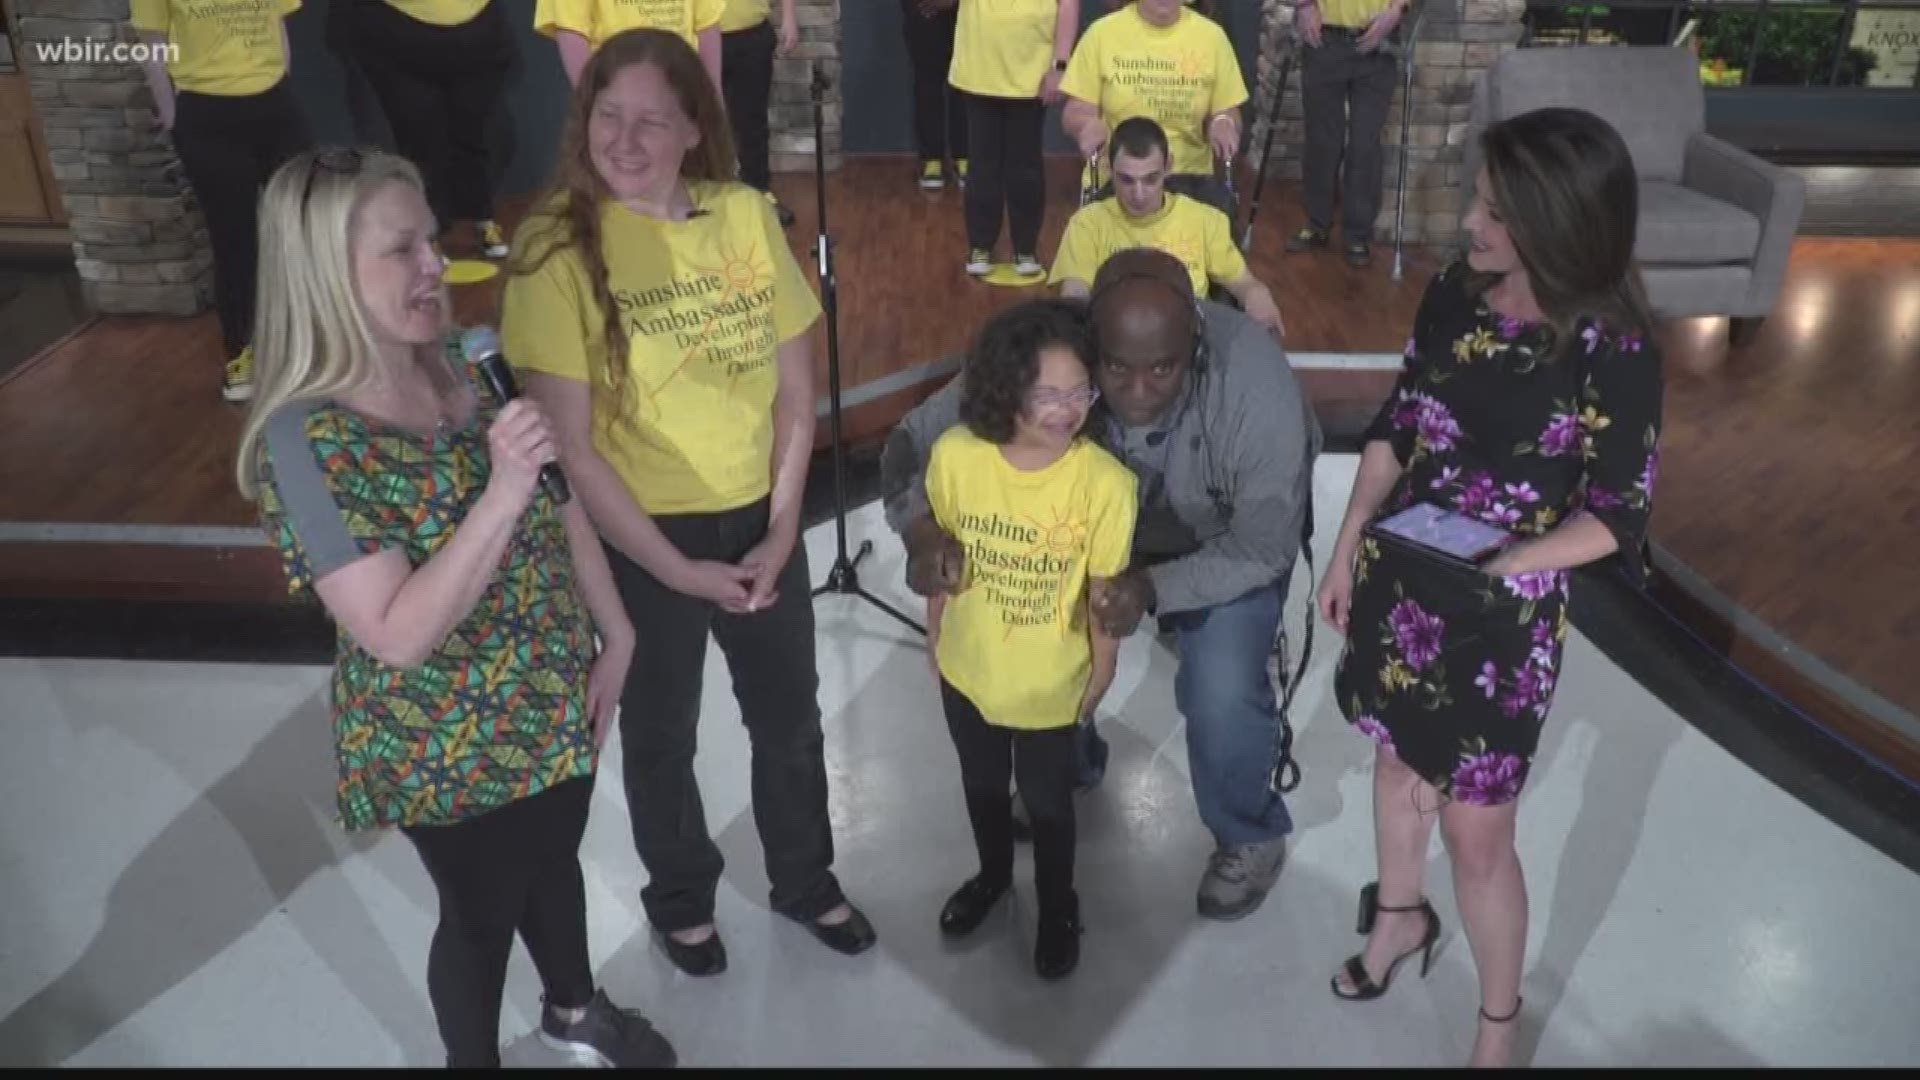 WBIR Floor manager Eric Foxx has a very special friend who is part of the Sunshine Ambassadors. Today-they shared a special moment with him. April 24, 2019-4pm.